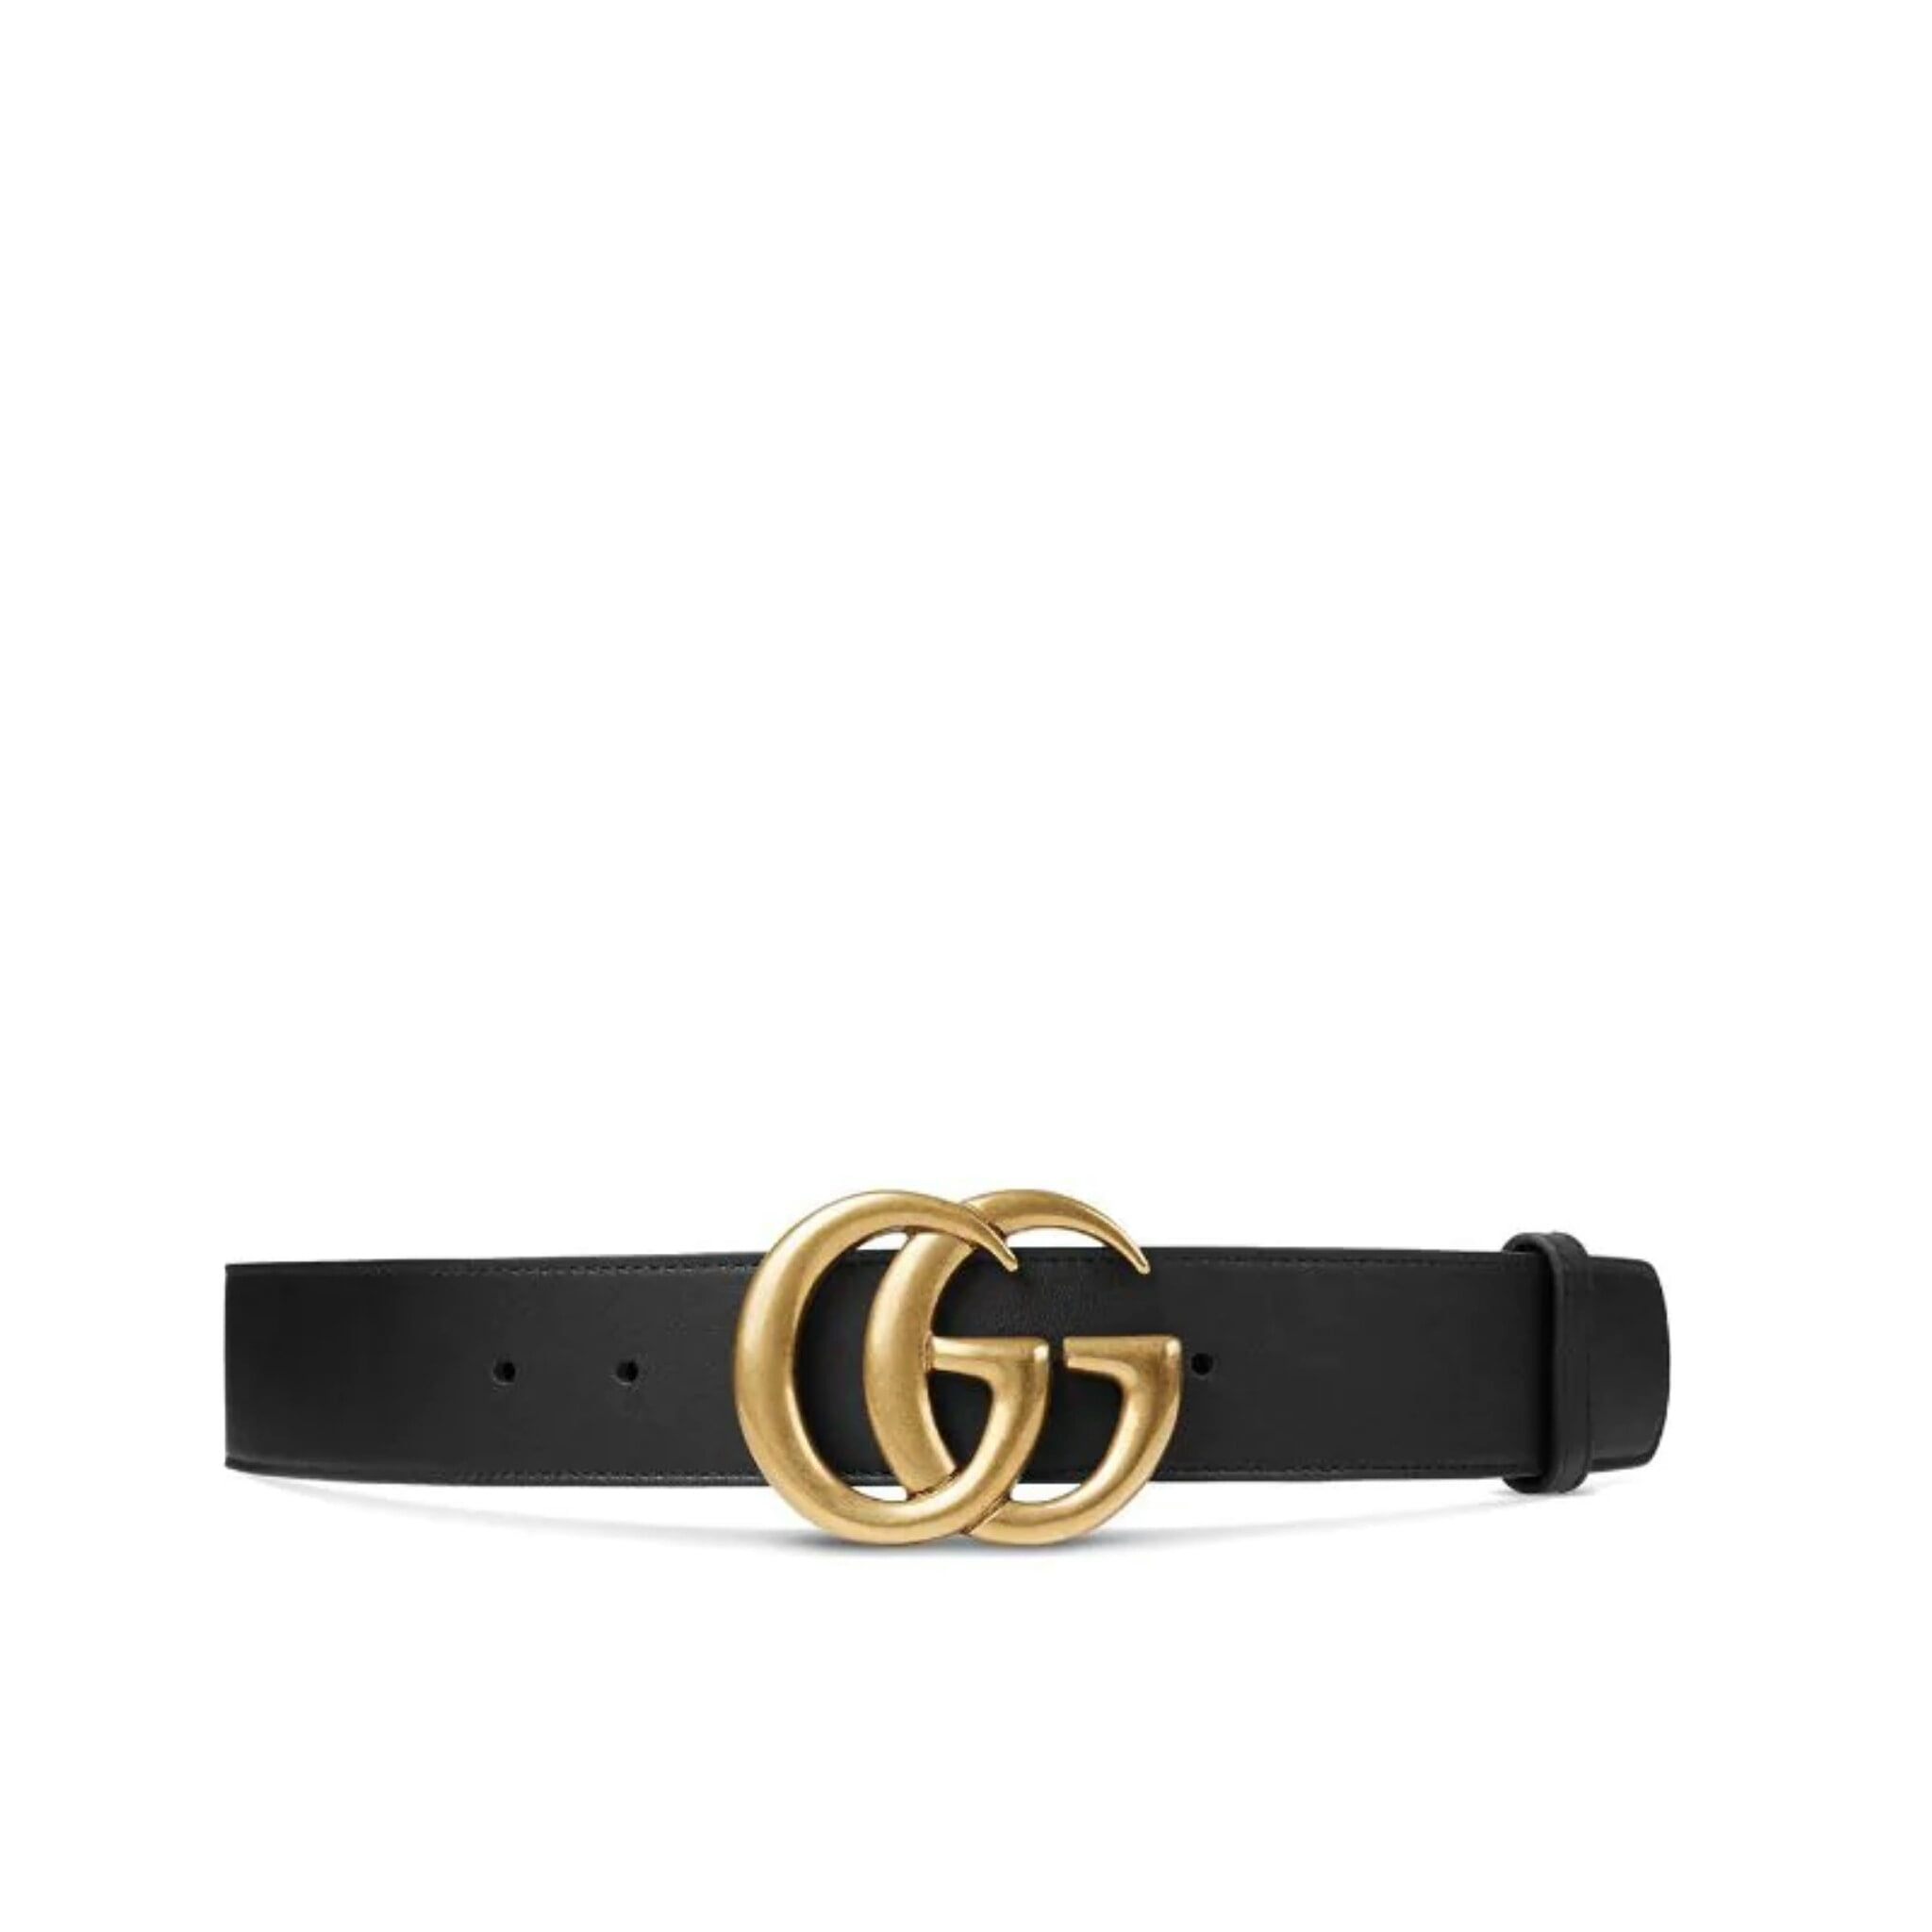 gucci belt cheap prices